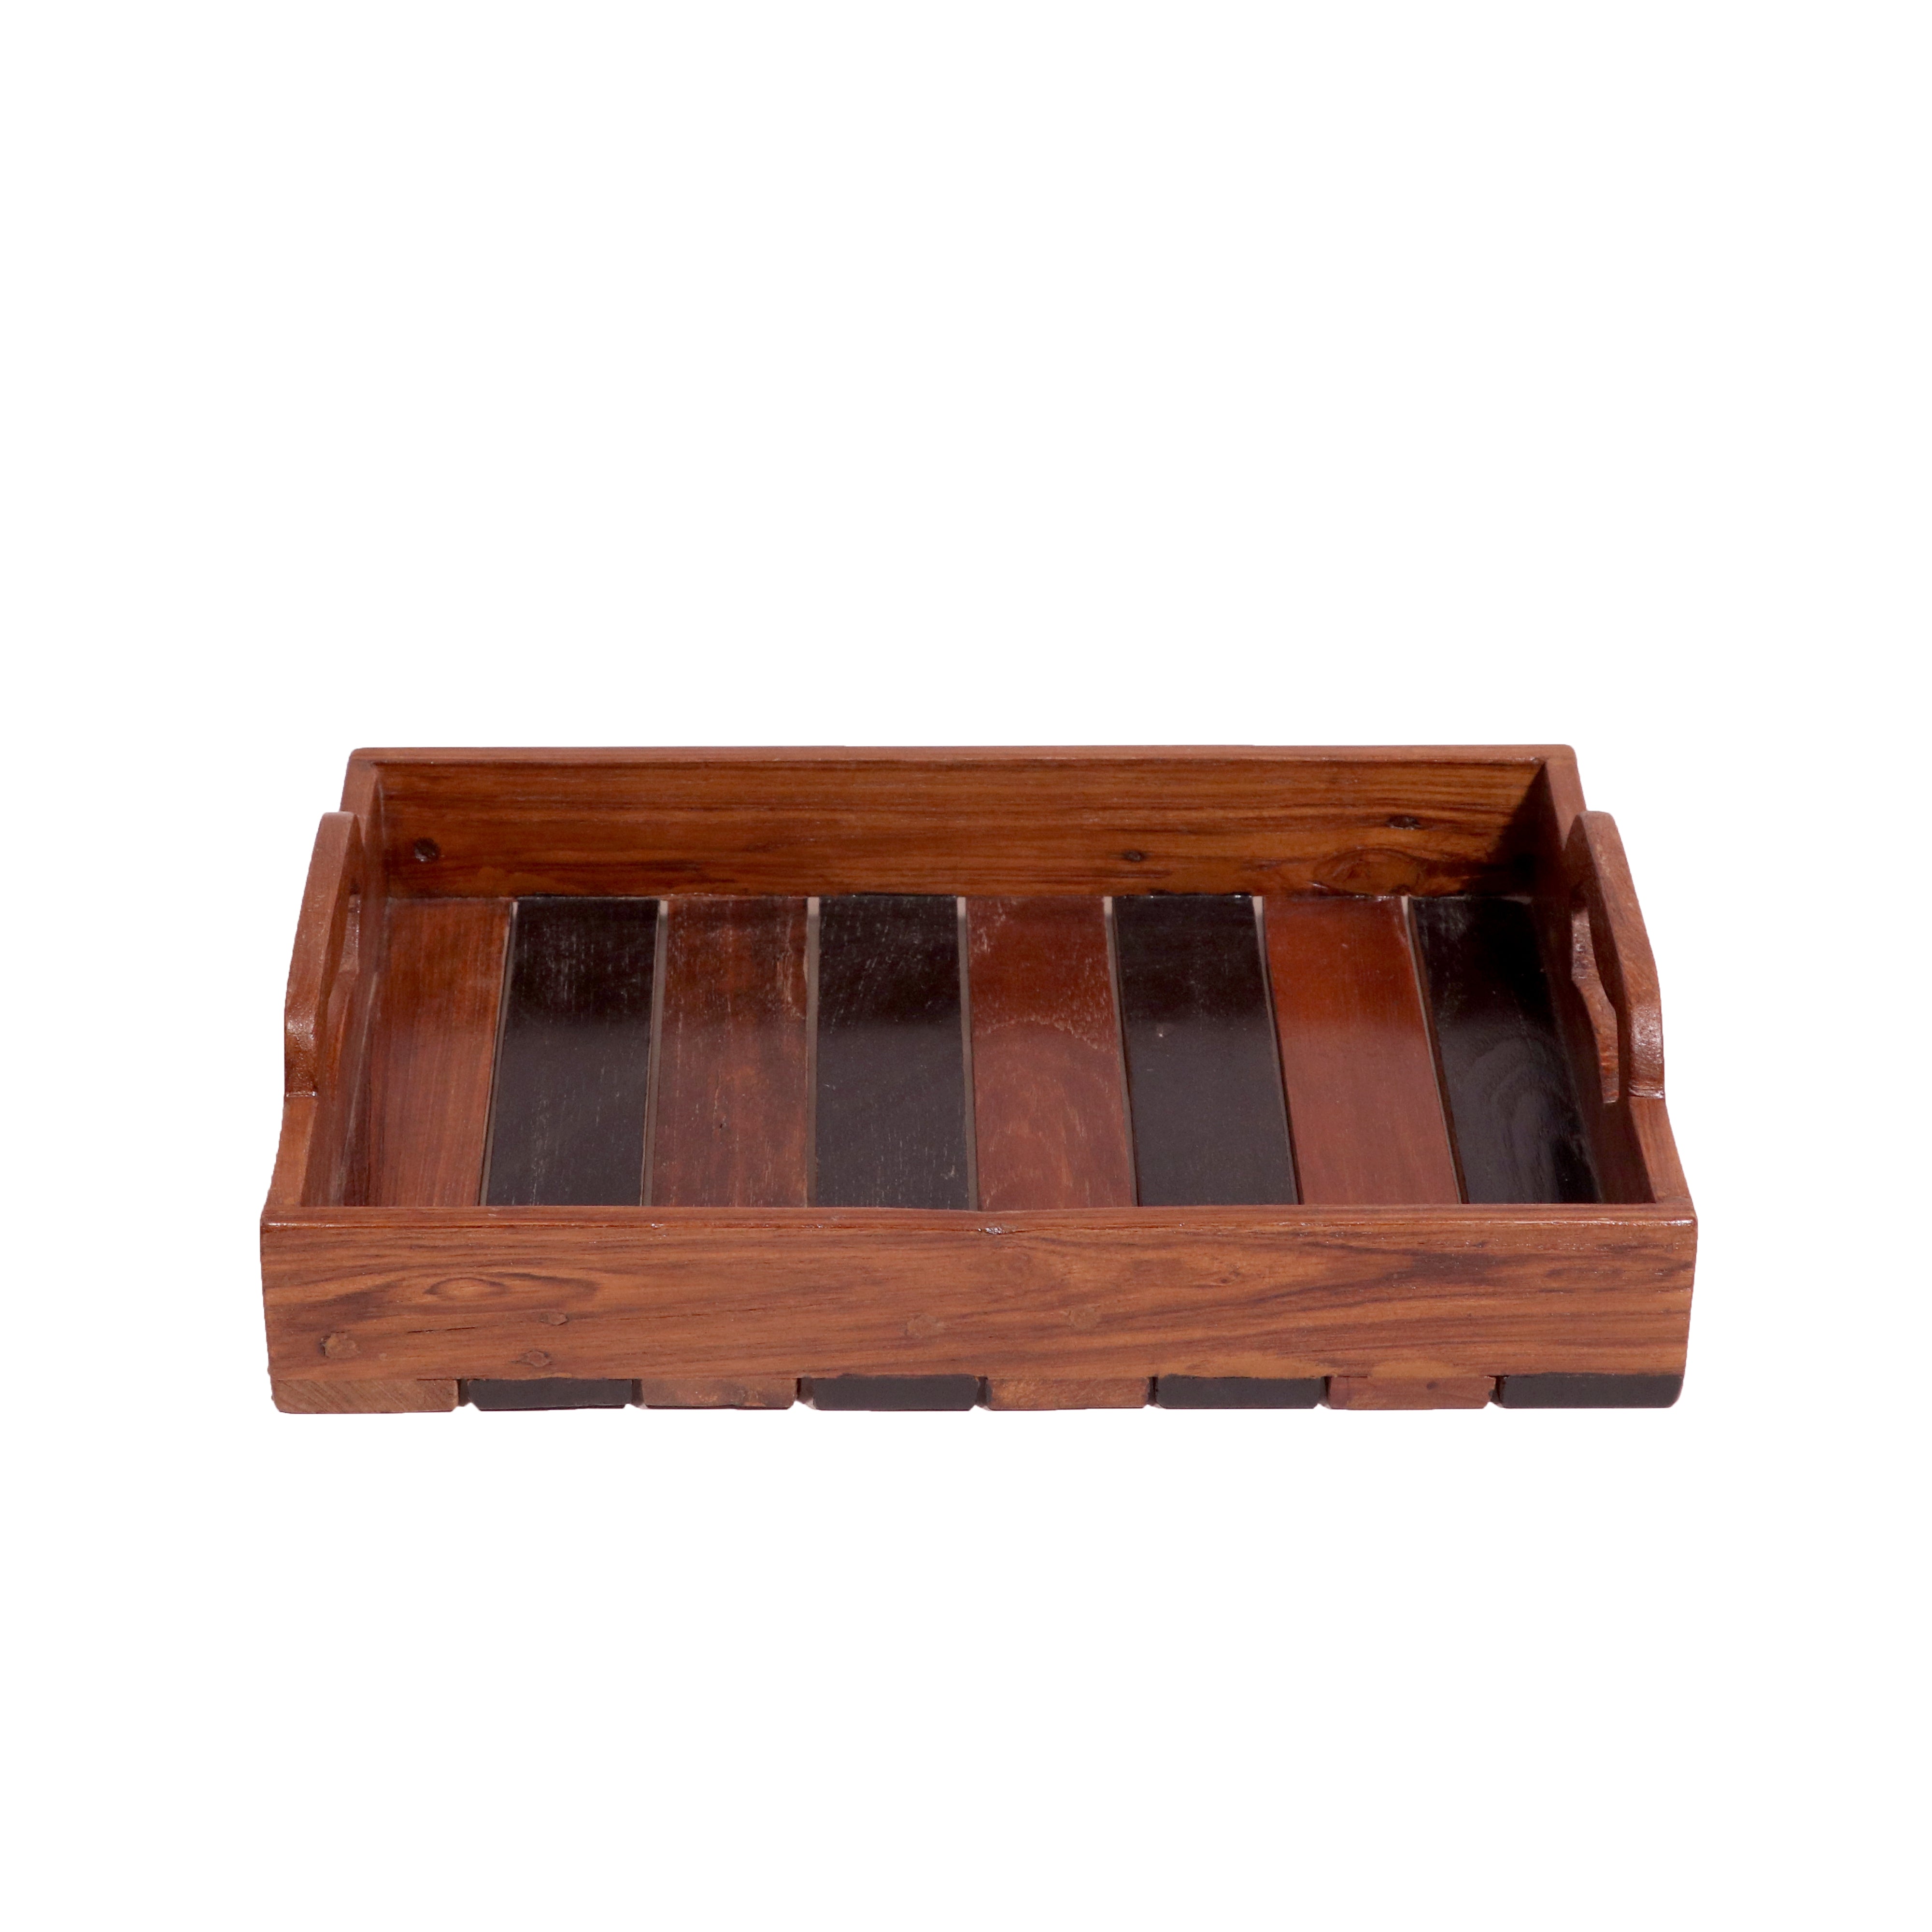 Stripped Sober Styled Handmade Wooden Tray - Set of 3 Tray